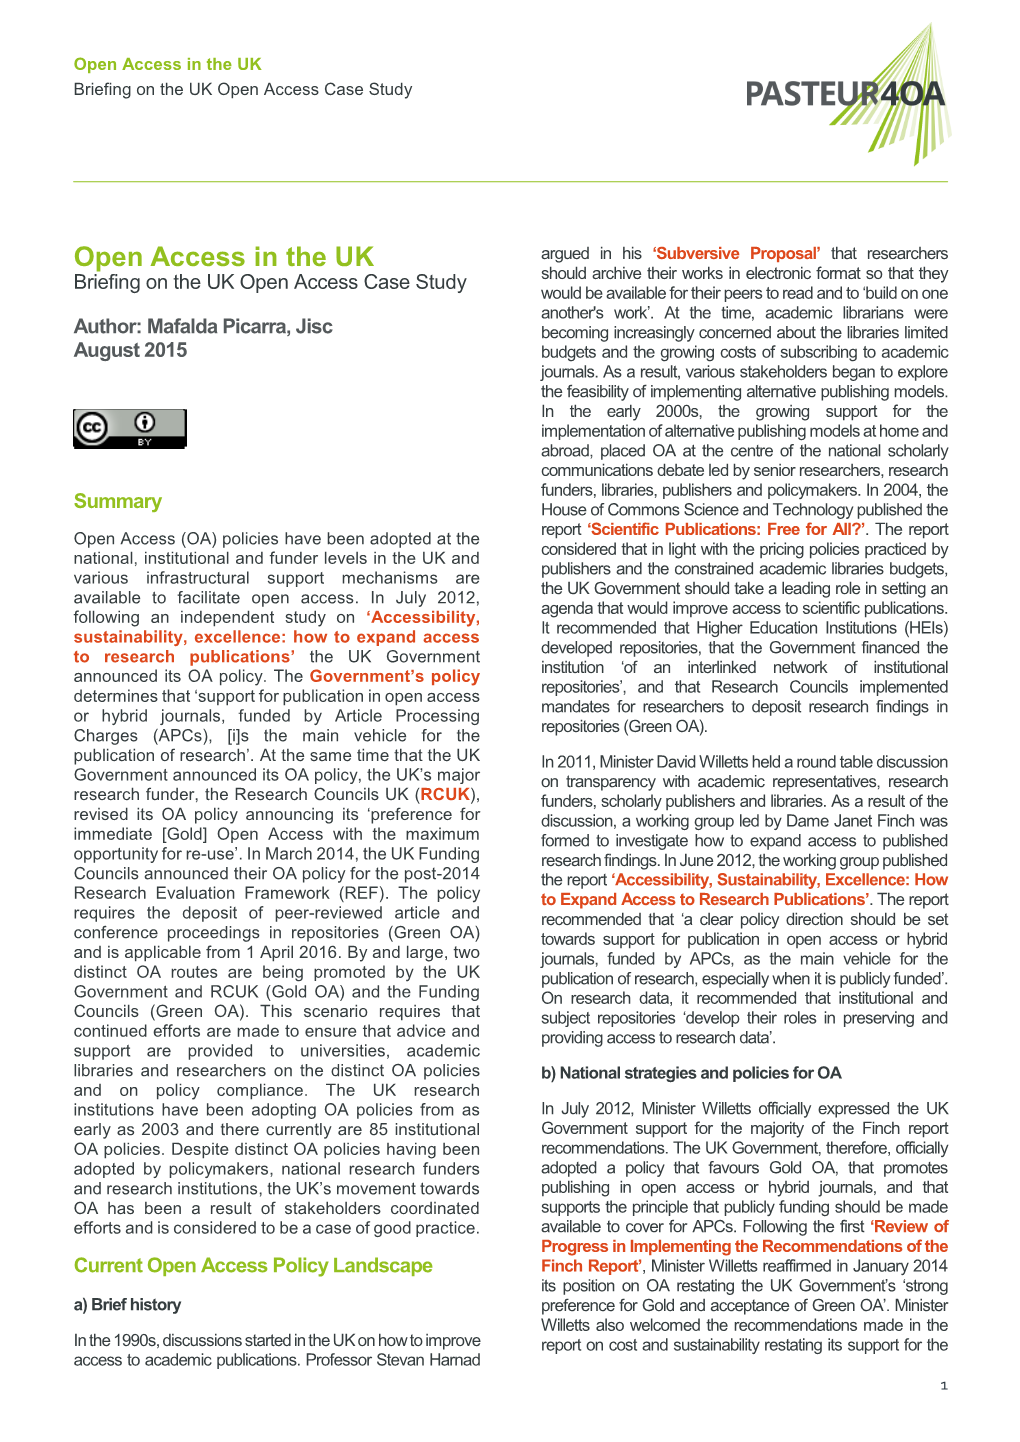 Open Access in the UK Briefing on the UK Open Access Case Study